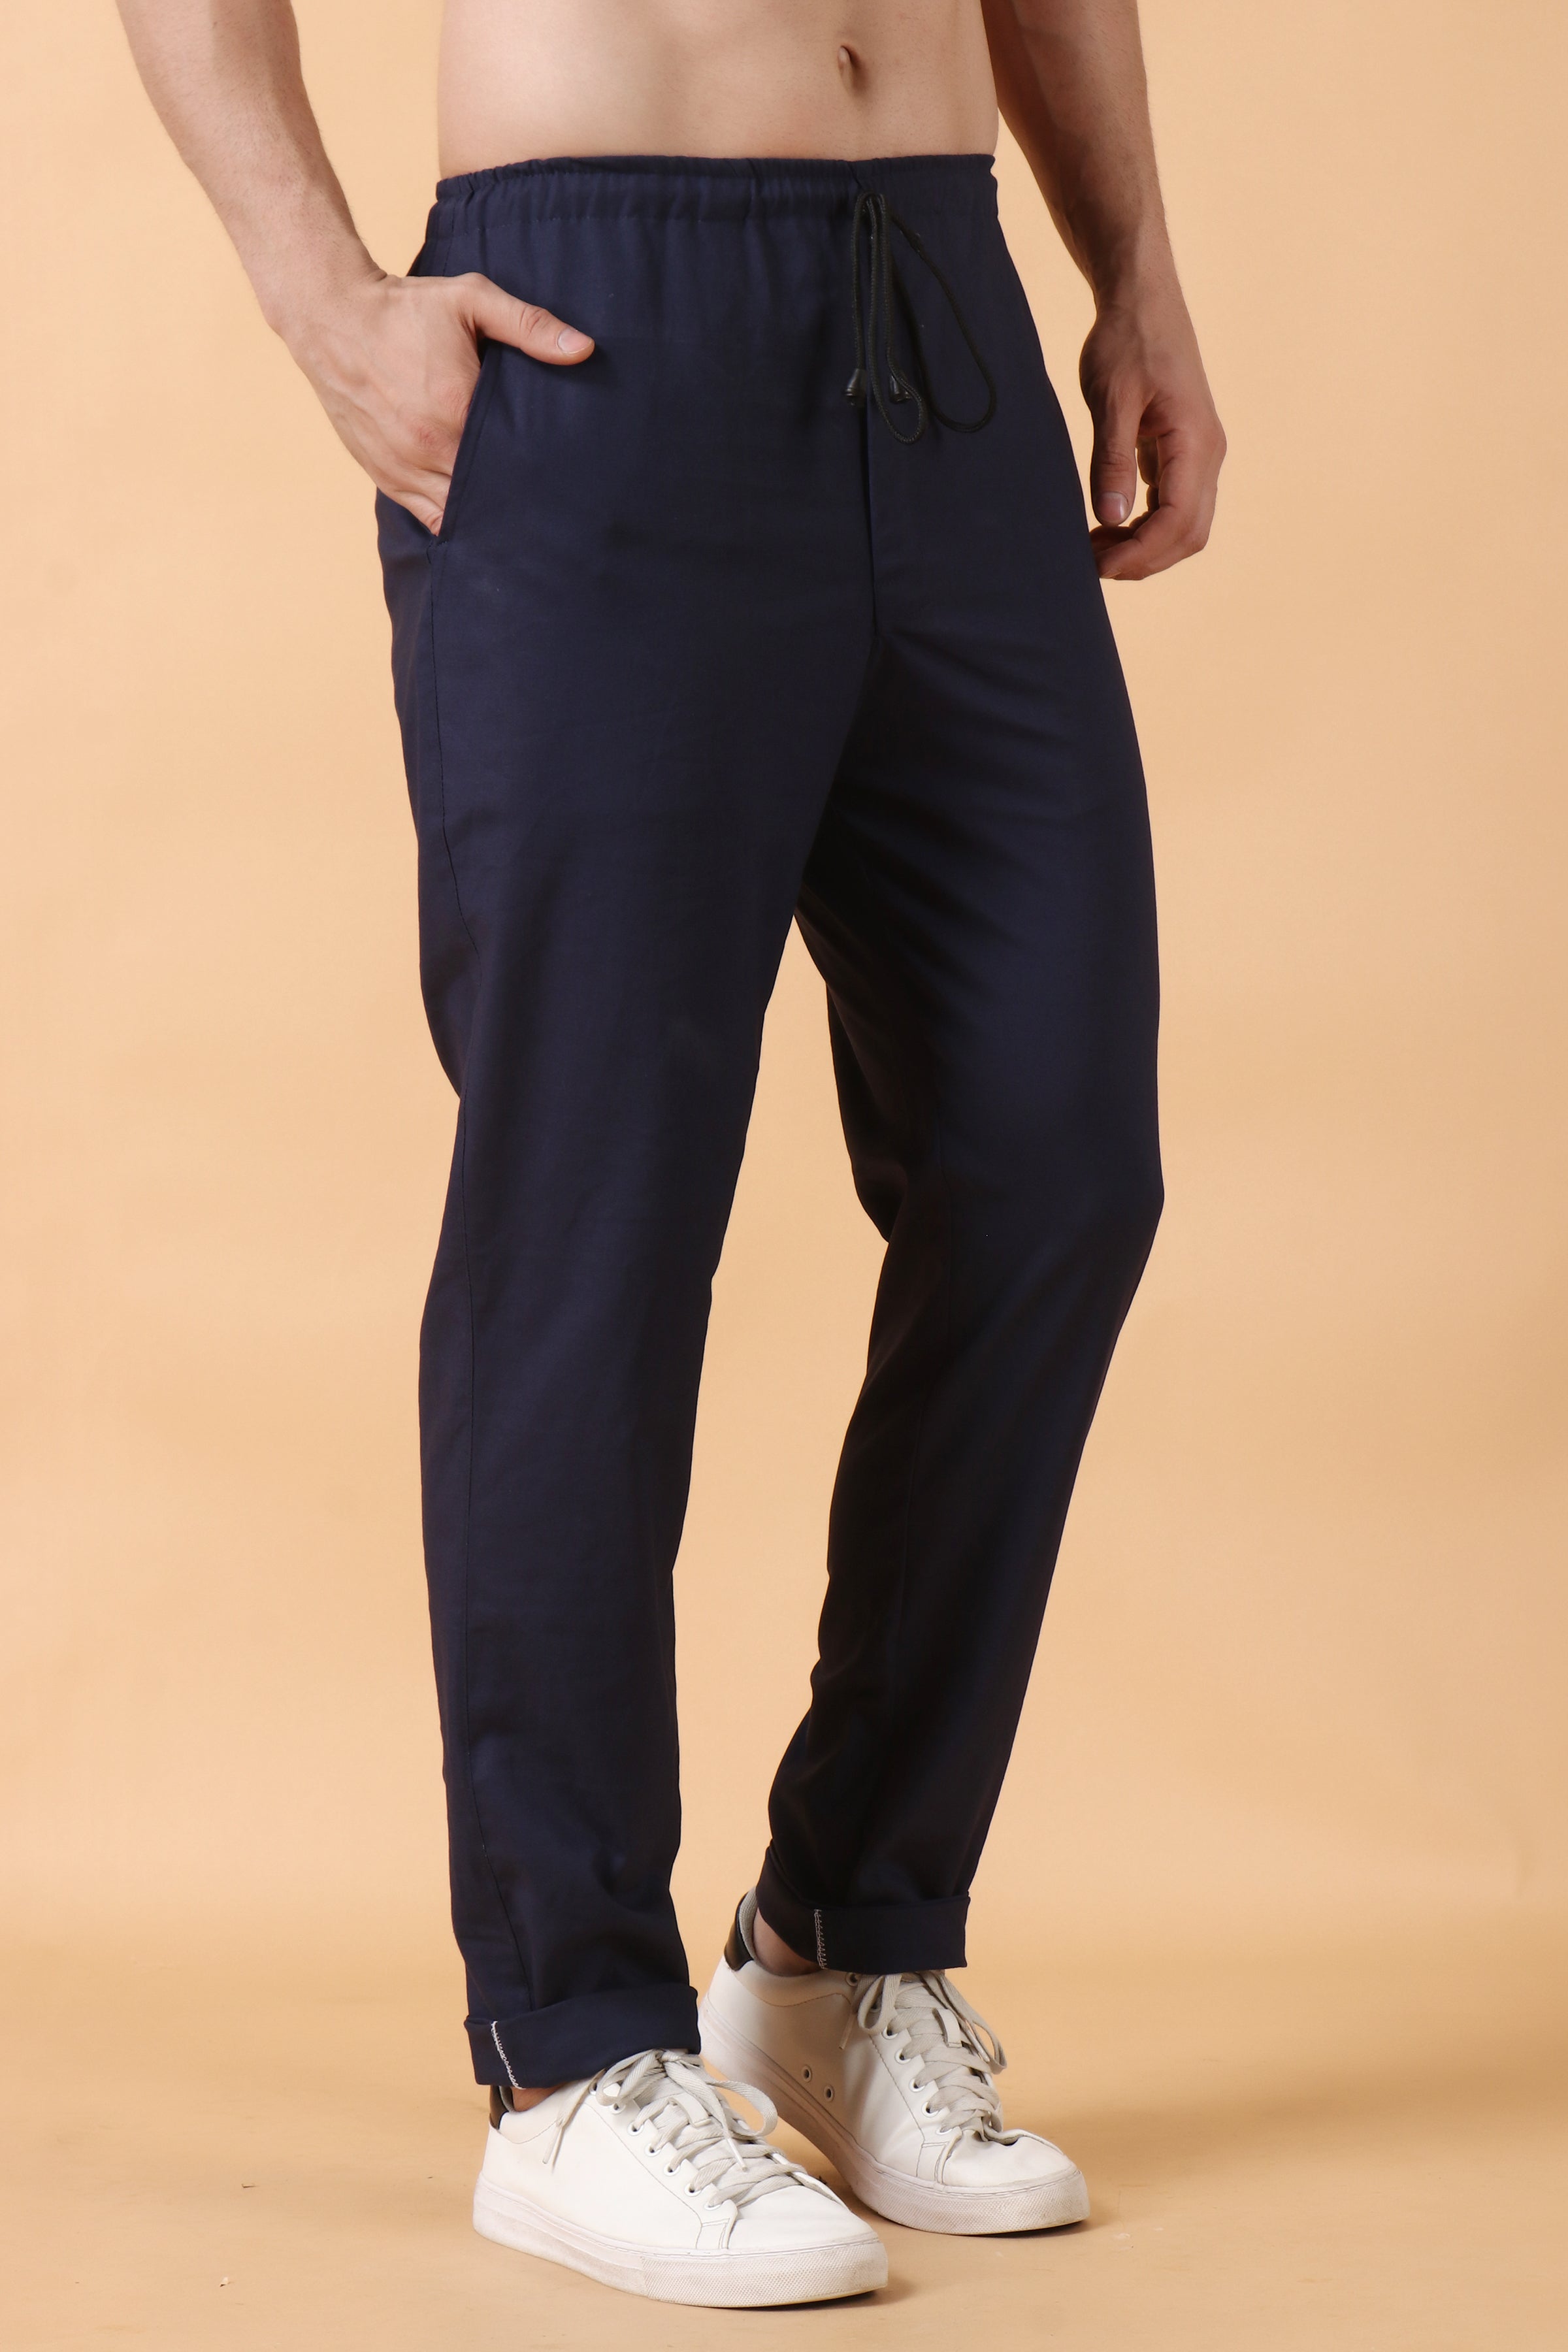 Buy Regular Fit Men Trousers Green and Navy Blue Combo of 2 Polyester Blend  for Best Price Reviews Free Shipping